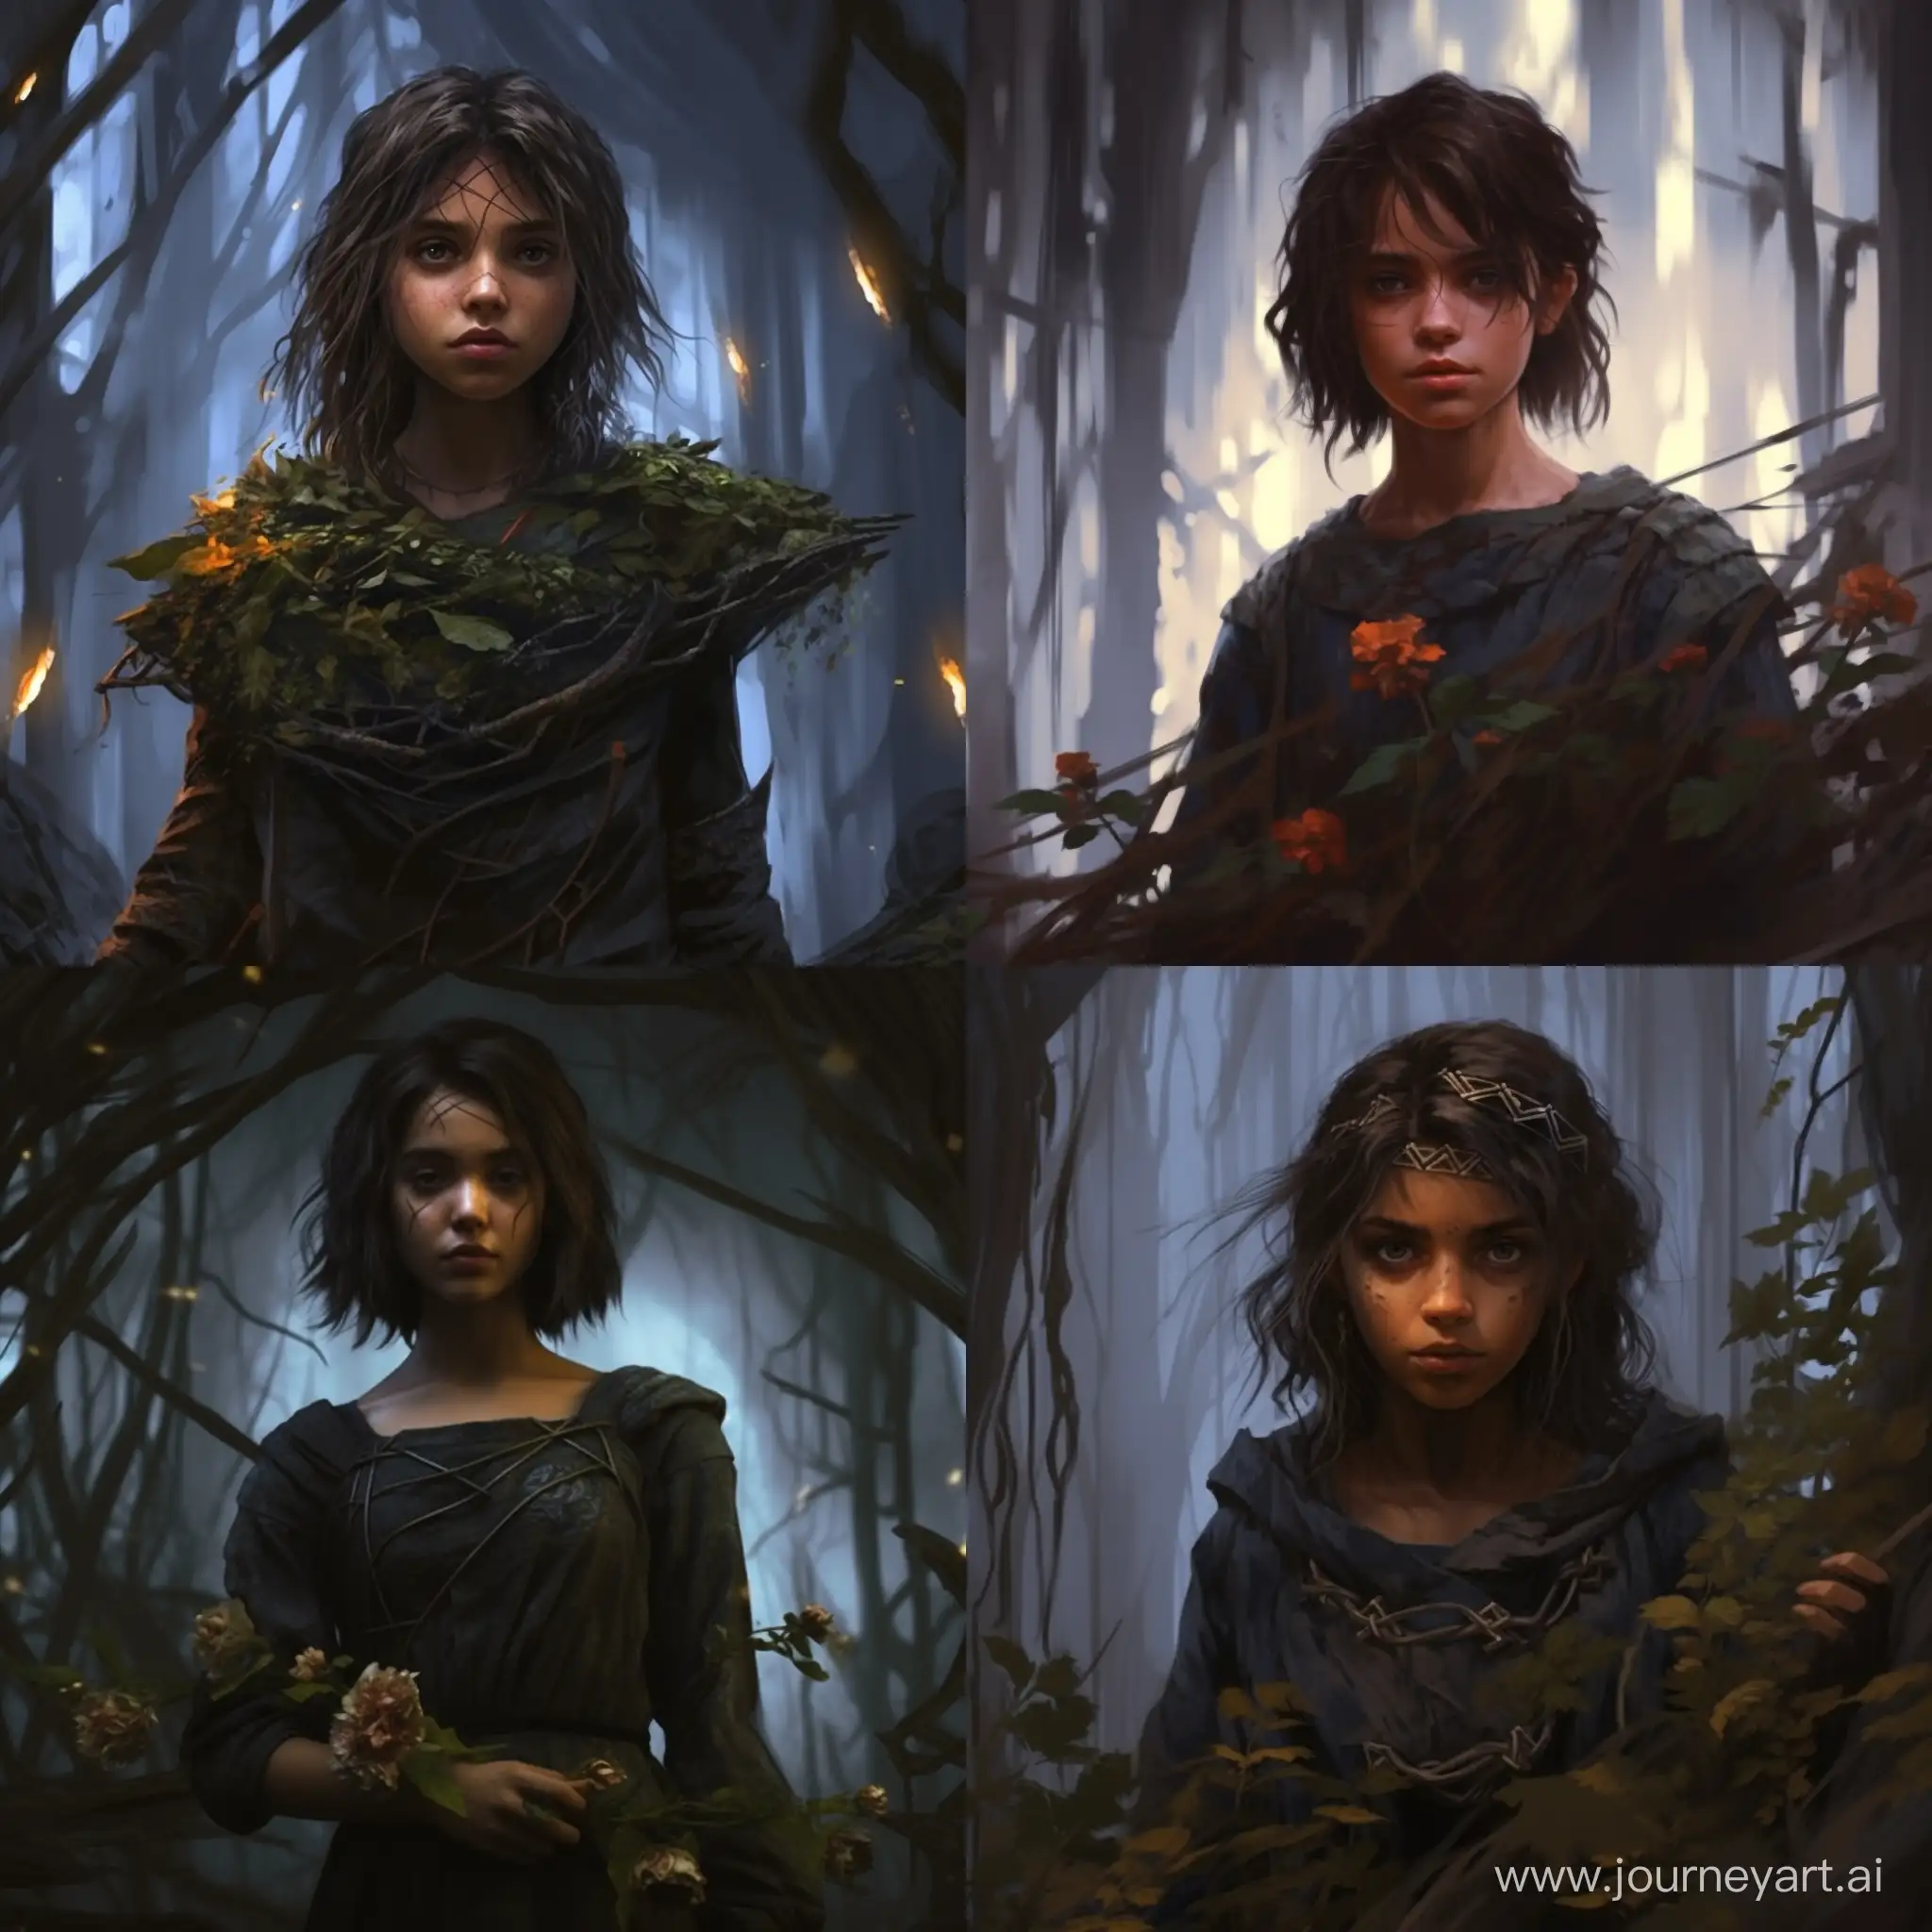 rpg, fantasy, druid girl, plants clothes, dark short hair, scary background, demonic ambience, young teen, art, portrait